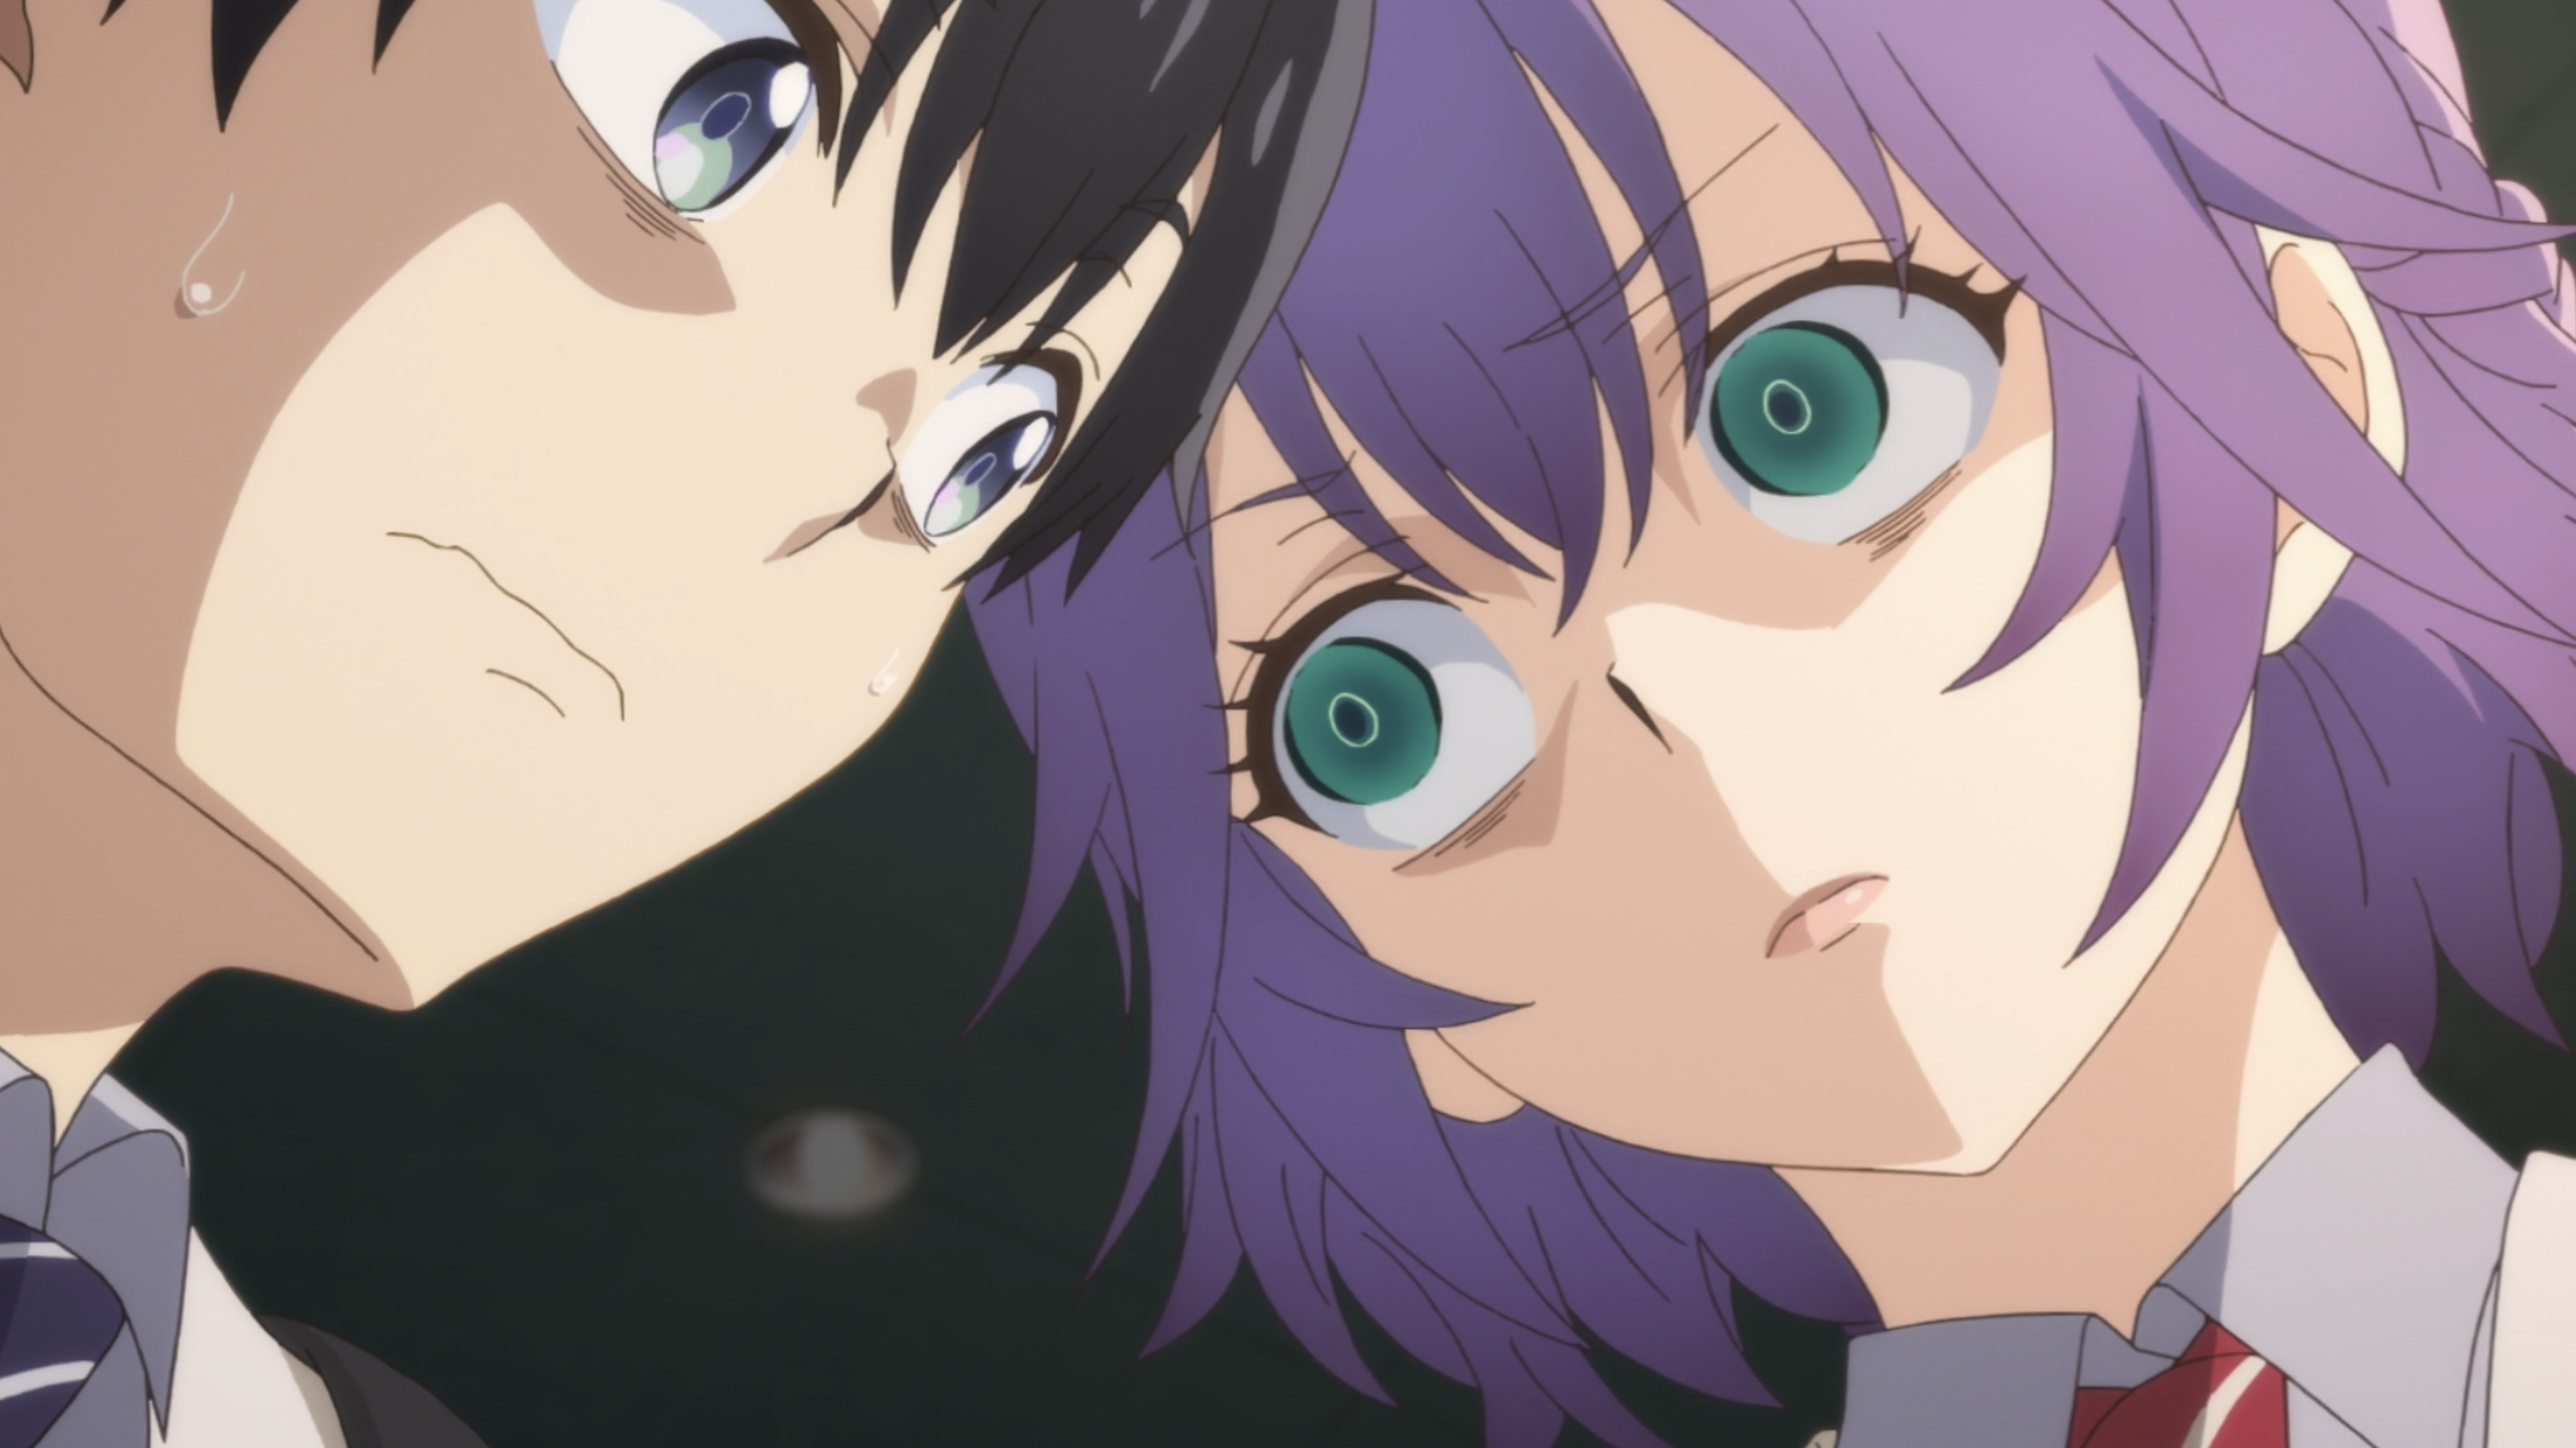 A Couple of Cuckoos Episode 14 Preview Released - Anime Corner